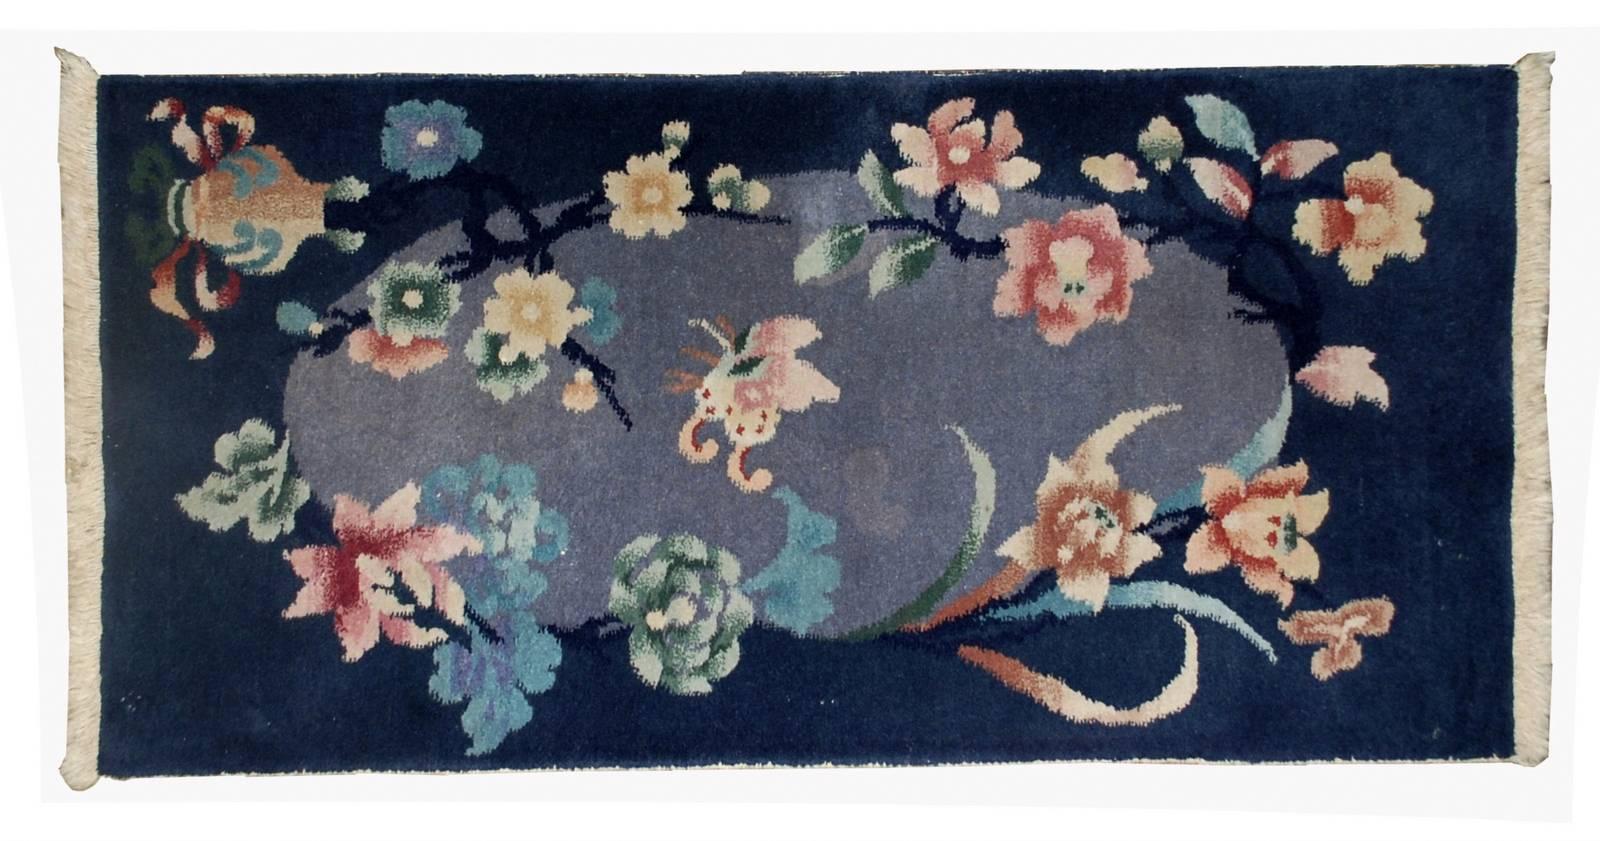 Handmade antique Art Deco Chinese rug in original condition. The rug made in night blue shade for the border with oval central area in a grey shade. It is floral and decorated with large flowers in Art Deco style. The rug is in original good